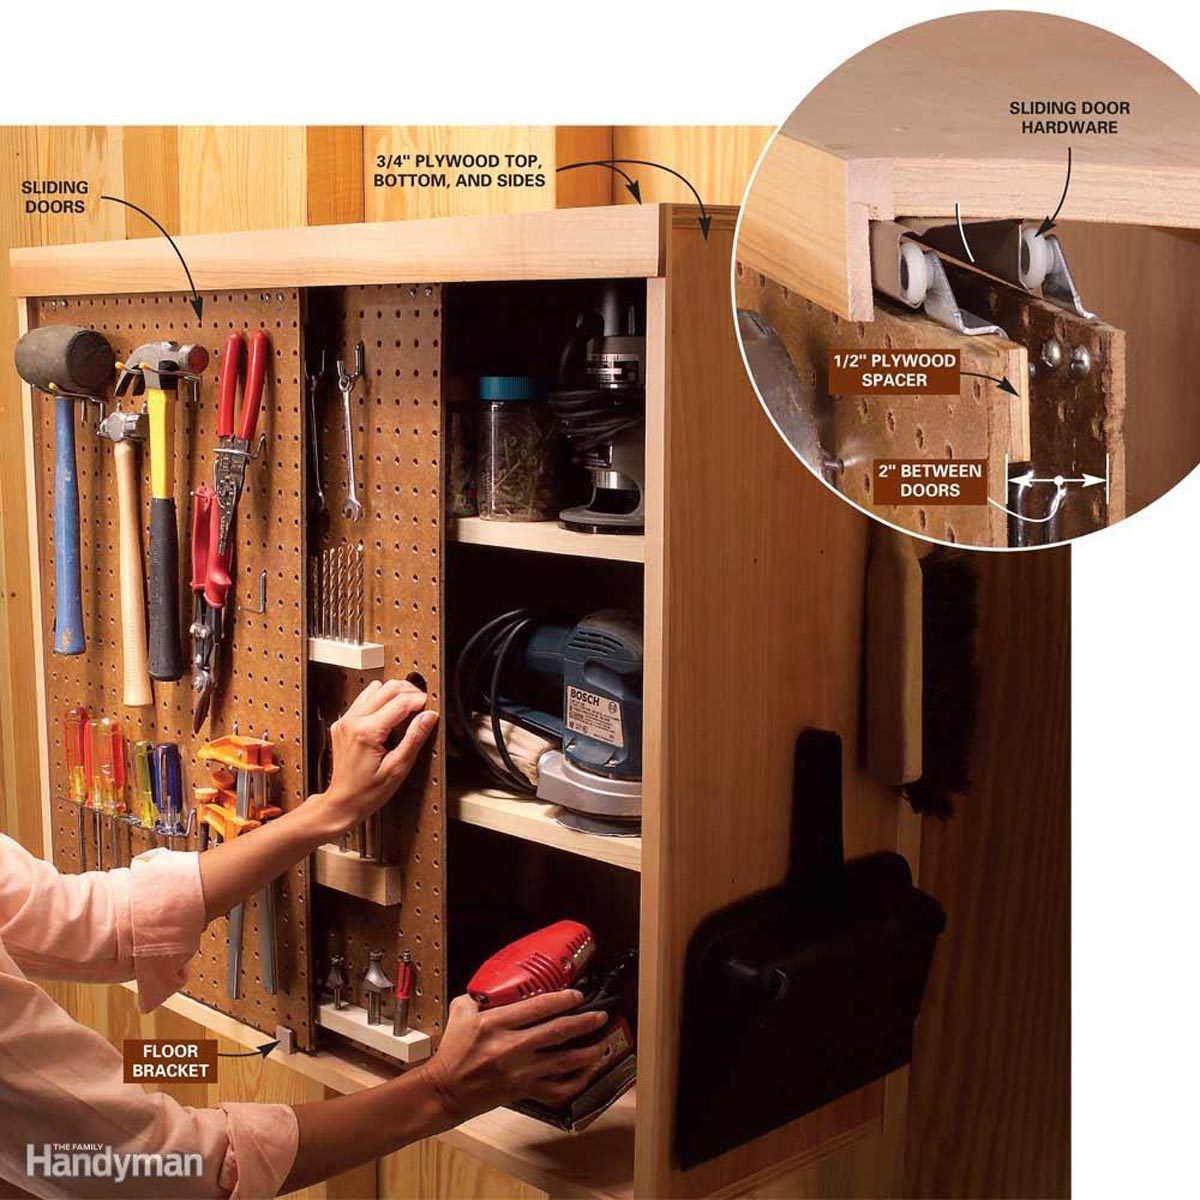 7 Ideas to Make Your Tools Mobile & Maximize Workshop Space